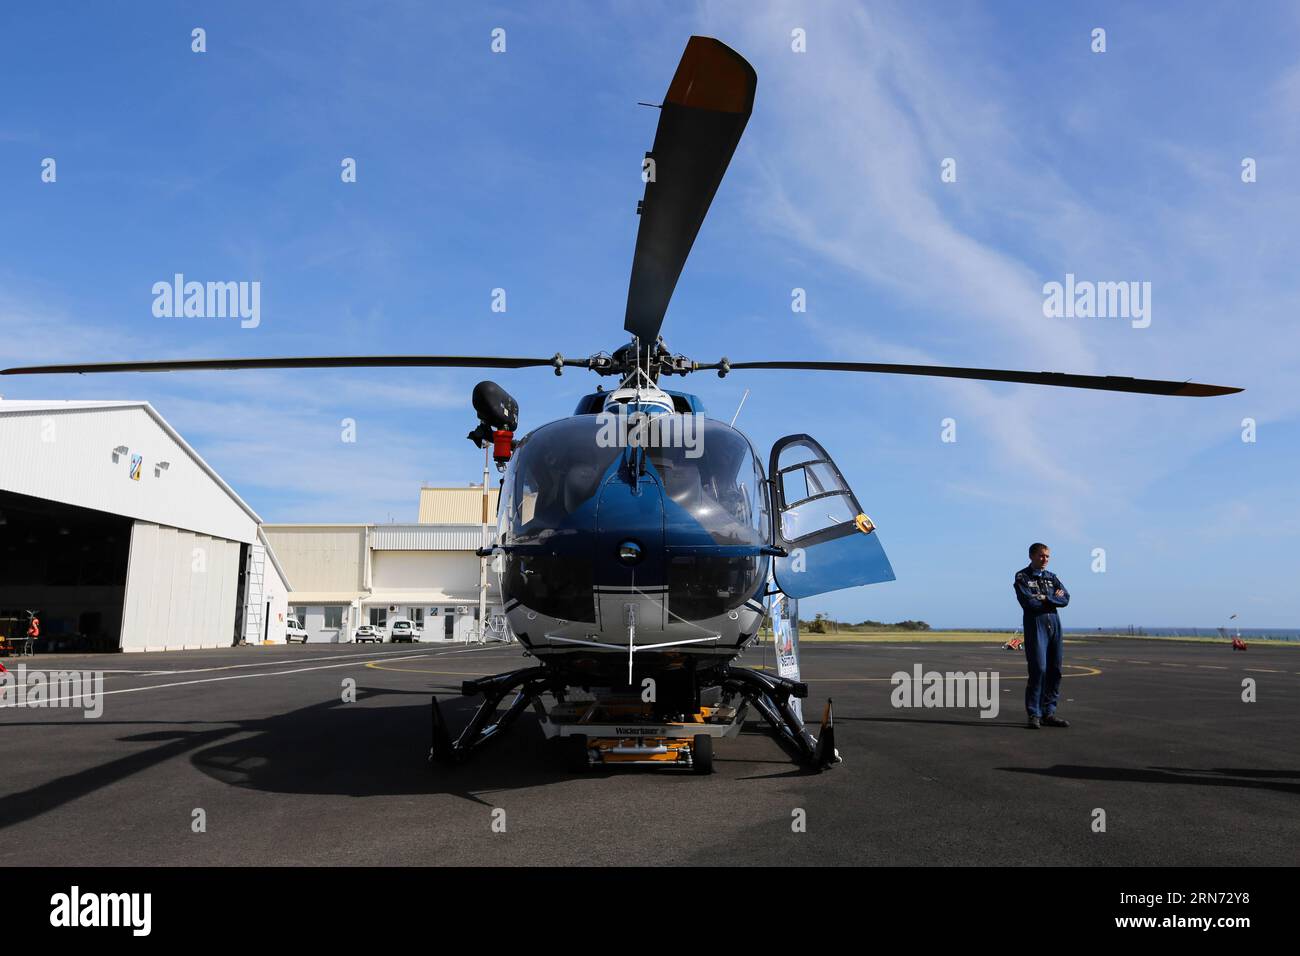 (150814) -- LA REUNION, Aug. 14, 2015 -- A pilot stands near a helicopter taking part in the searching mission at an airport in Saint Denis, La Reunion, Aug. 14, 2015. The administrator of Reunion Island Dominique Sorain told the media on Friday the active search for more MH370 debris will continue until Monday. No debris related to the plane has been found in the sea during the 35 hours of a combined search by a CASA search plane of French army and three helicopters, he said. ) (djj) LA REUNION-MH370 DEBRIS-SEARCH PanxSiwei PUBLICATIONxNOTxINxCHN   150814 La Reunion Aug 14 2015 a Pilot stands Stock Photo